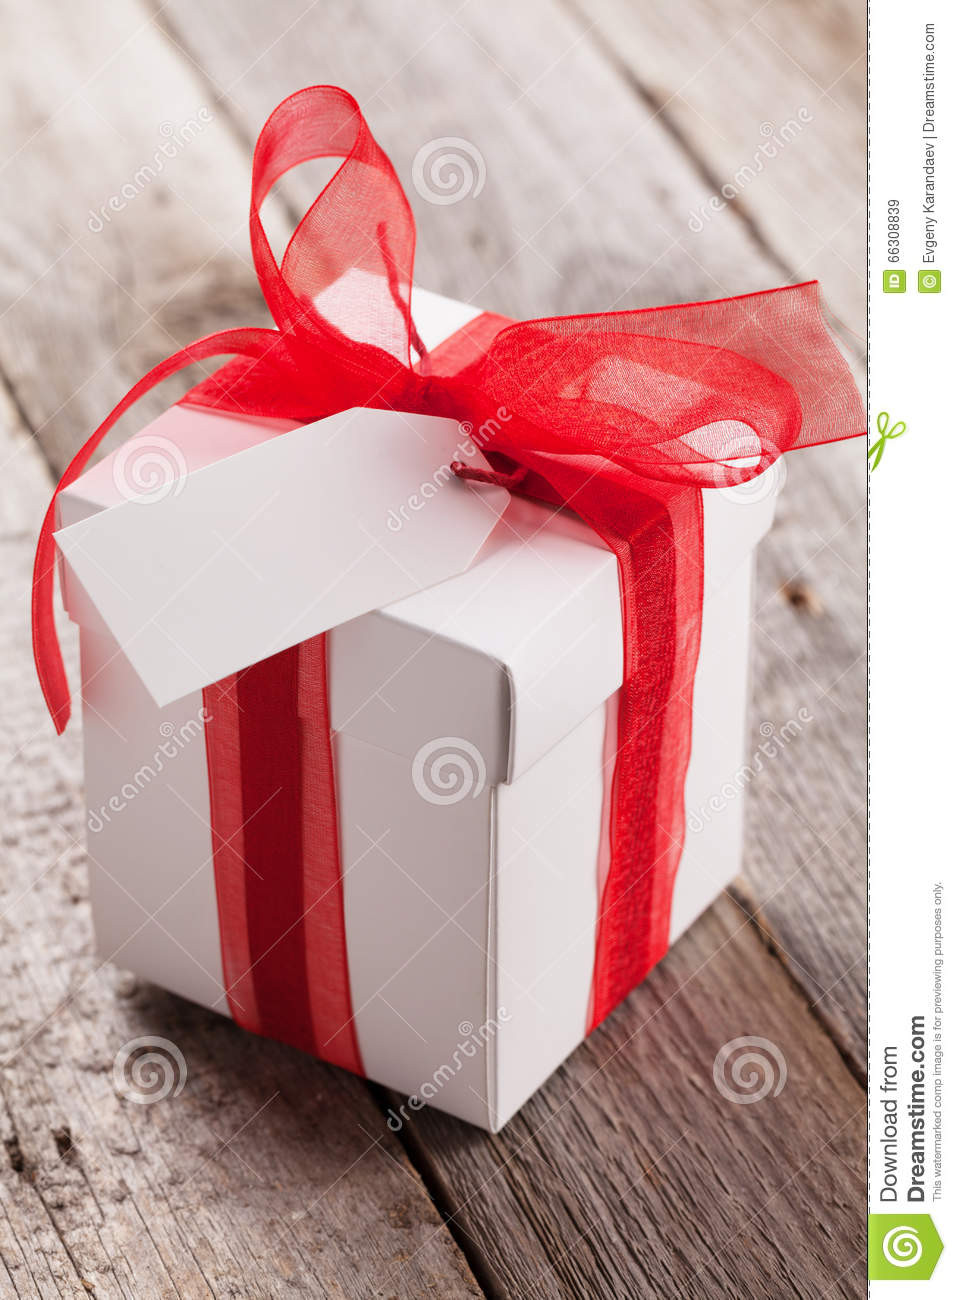 Valentines Day Gift Package
 Valentines day t box stock image Image of romantic